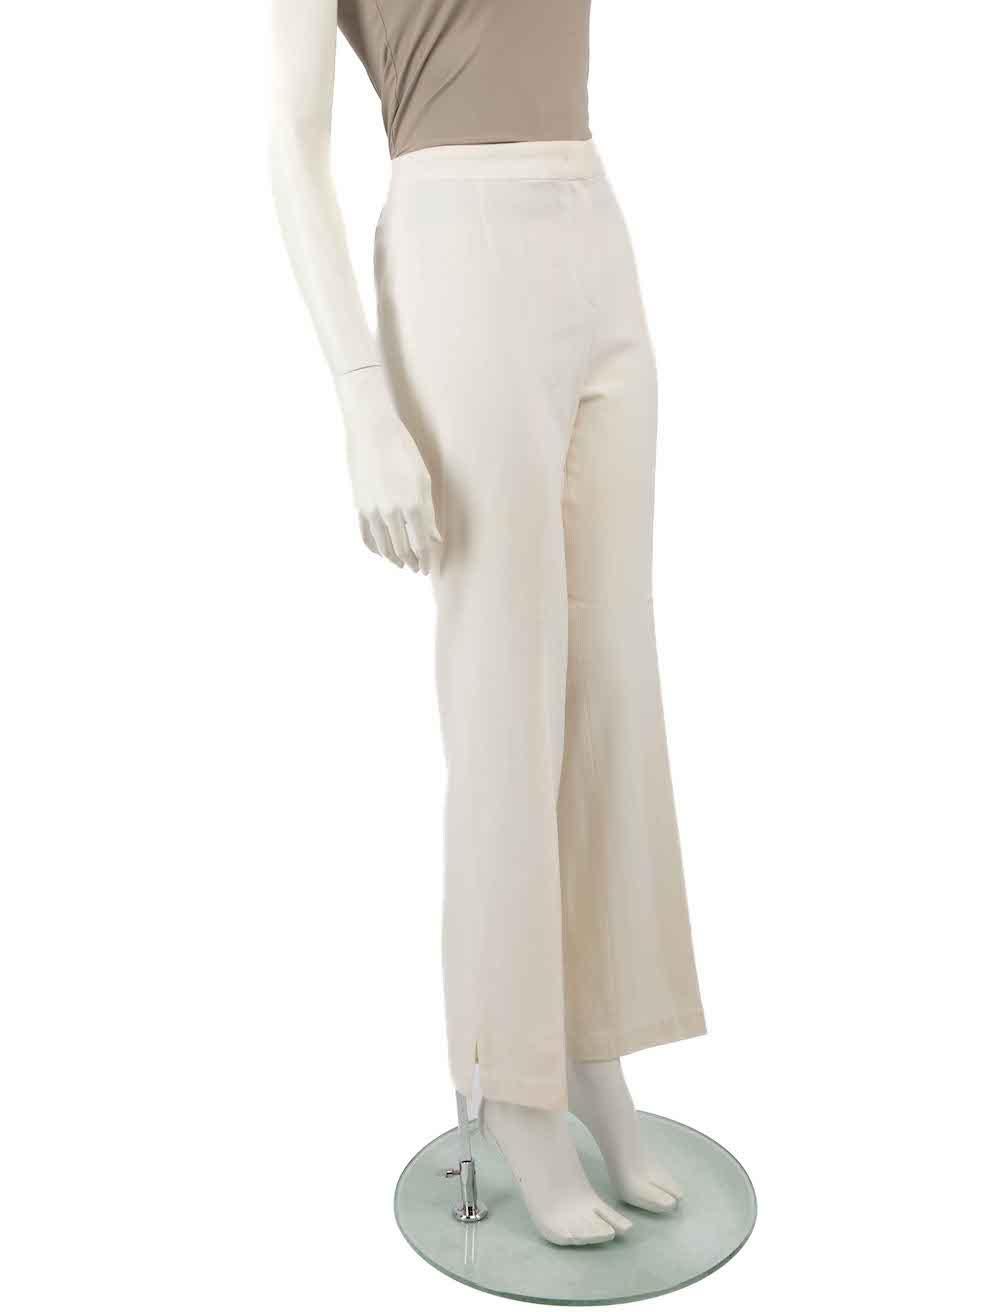 CONDITION is Good. Minor wear to trousers is evident. Light wear to the right leg with marks and the cuff split had been hand-sewn on this used Escada designer resale item.
 
 
 
 Details
 
 
 Ecru
 
 Wool
 
 Trousers
 
 Straight leg
 
 Mid rise
 
